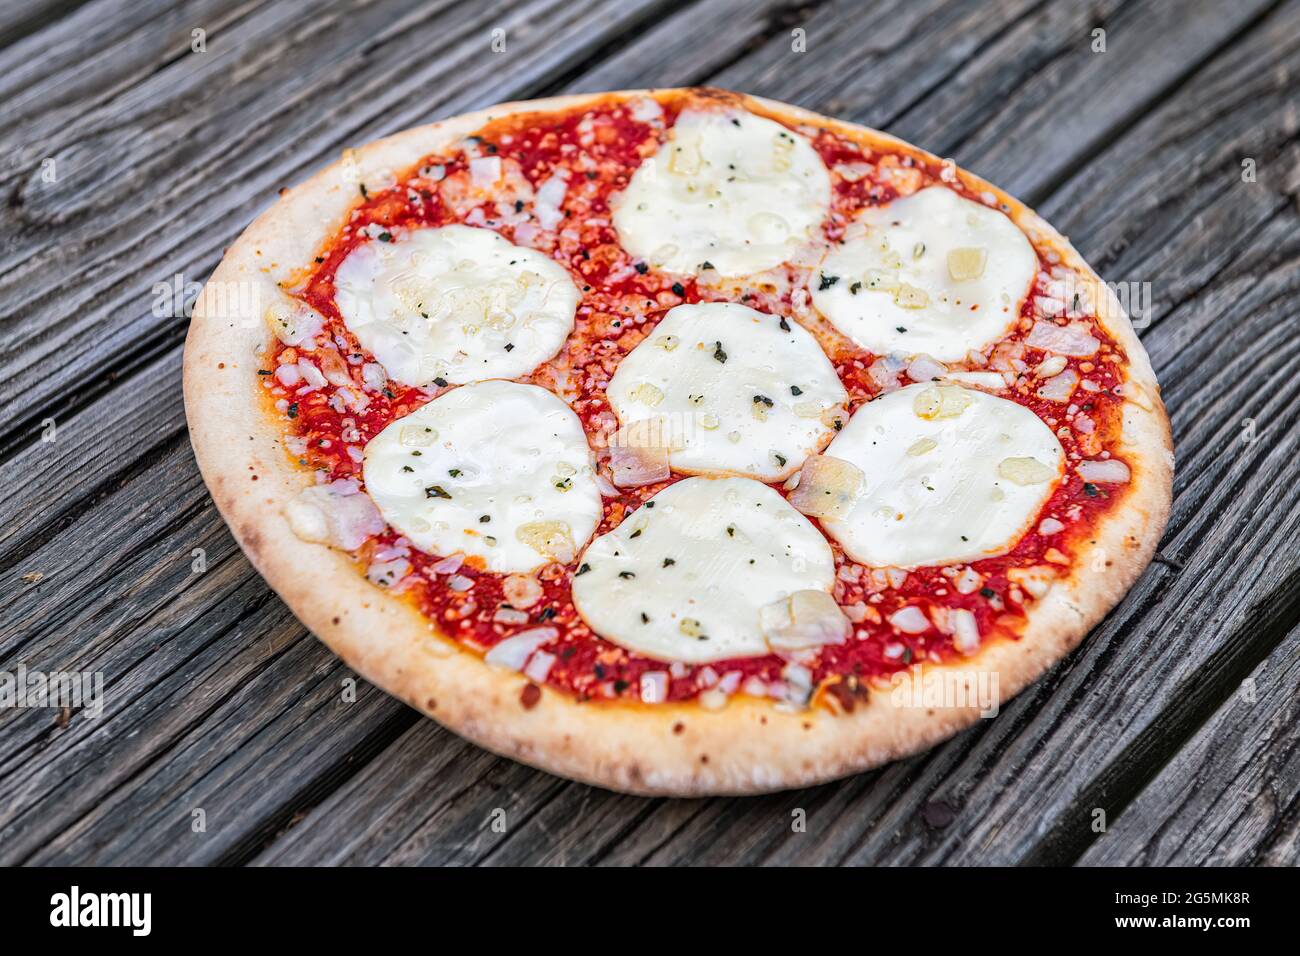 Fresh crust whole small pizza on table with melted mozzarella cheese and sprinkles and red tomato sauce closeup as Italian food cuisine Stock Photo